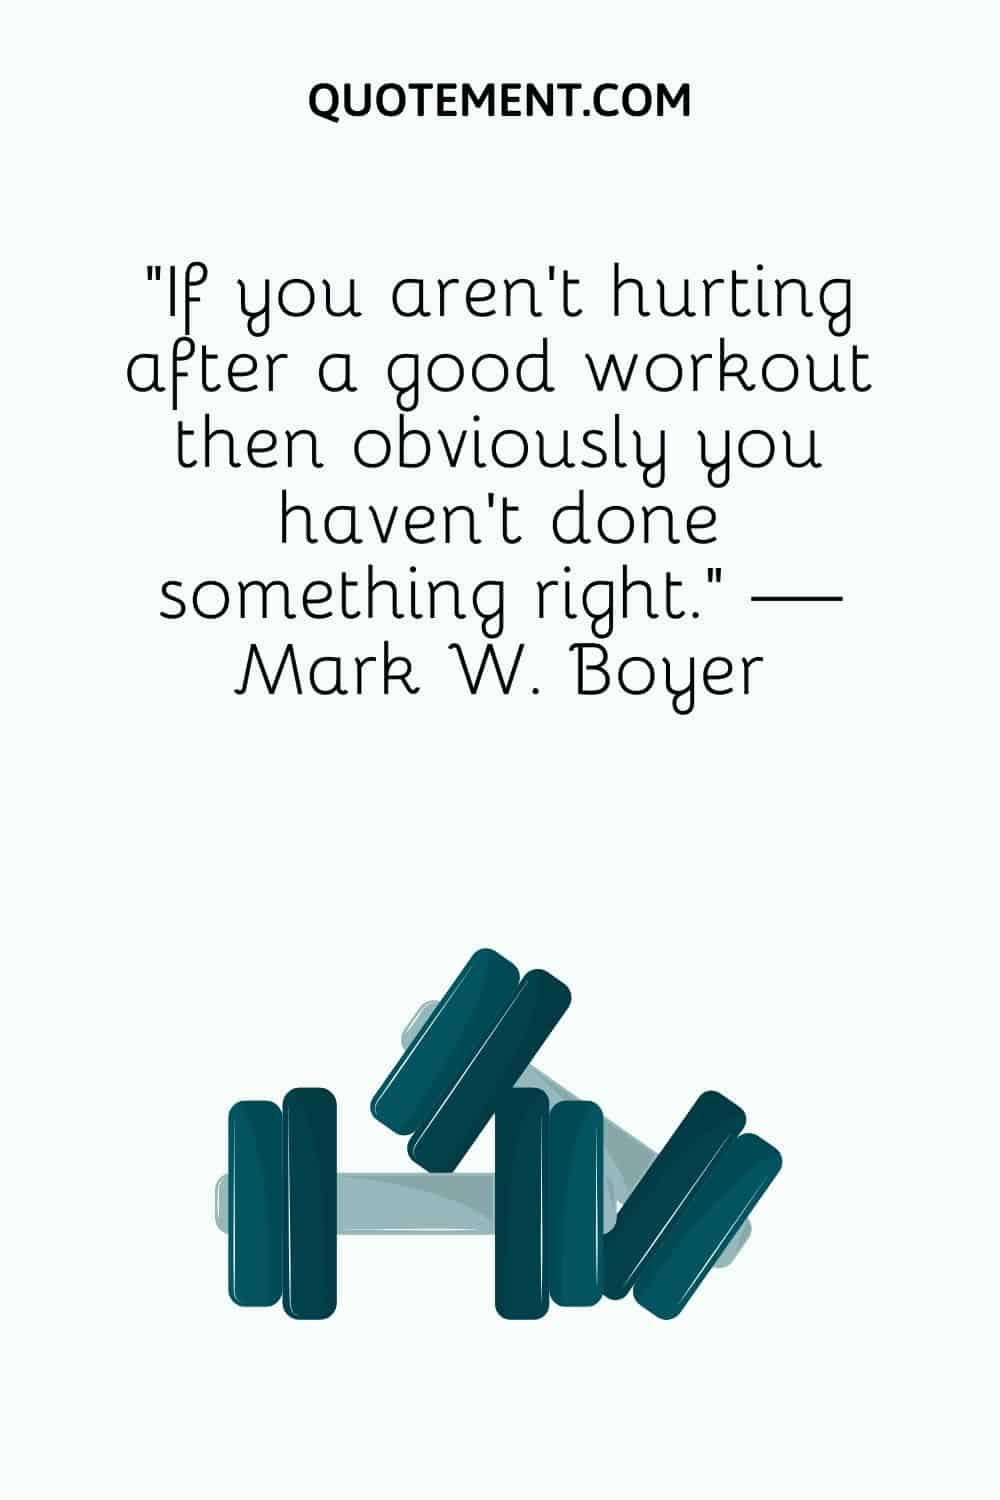 “If you aren’t hurting after a good workout then obviously you haven’t done something right.” — Mark W. Boyer